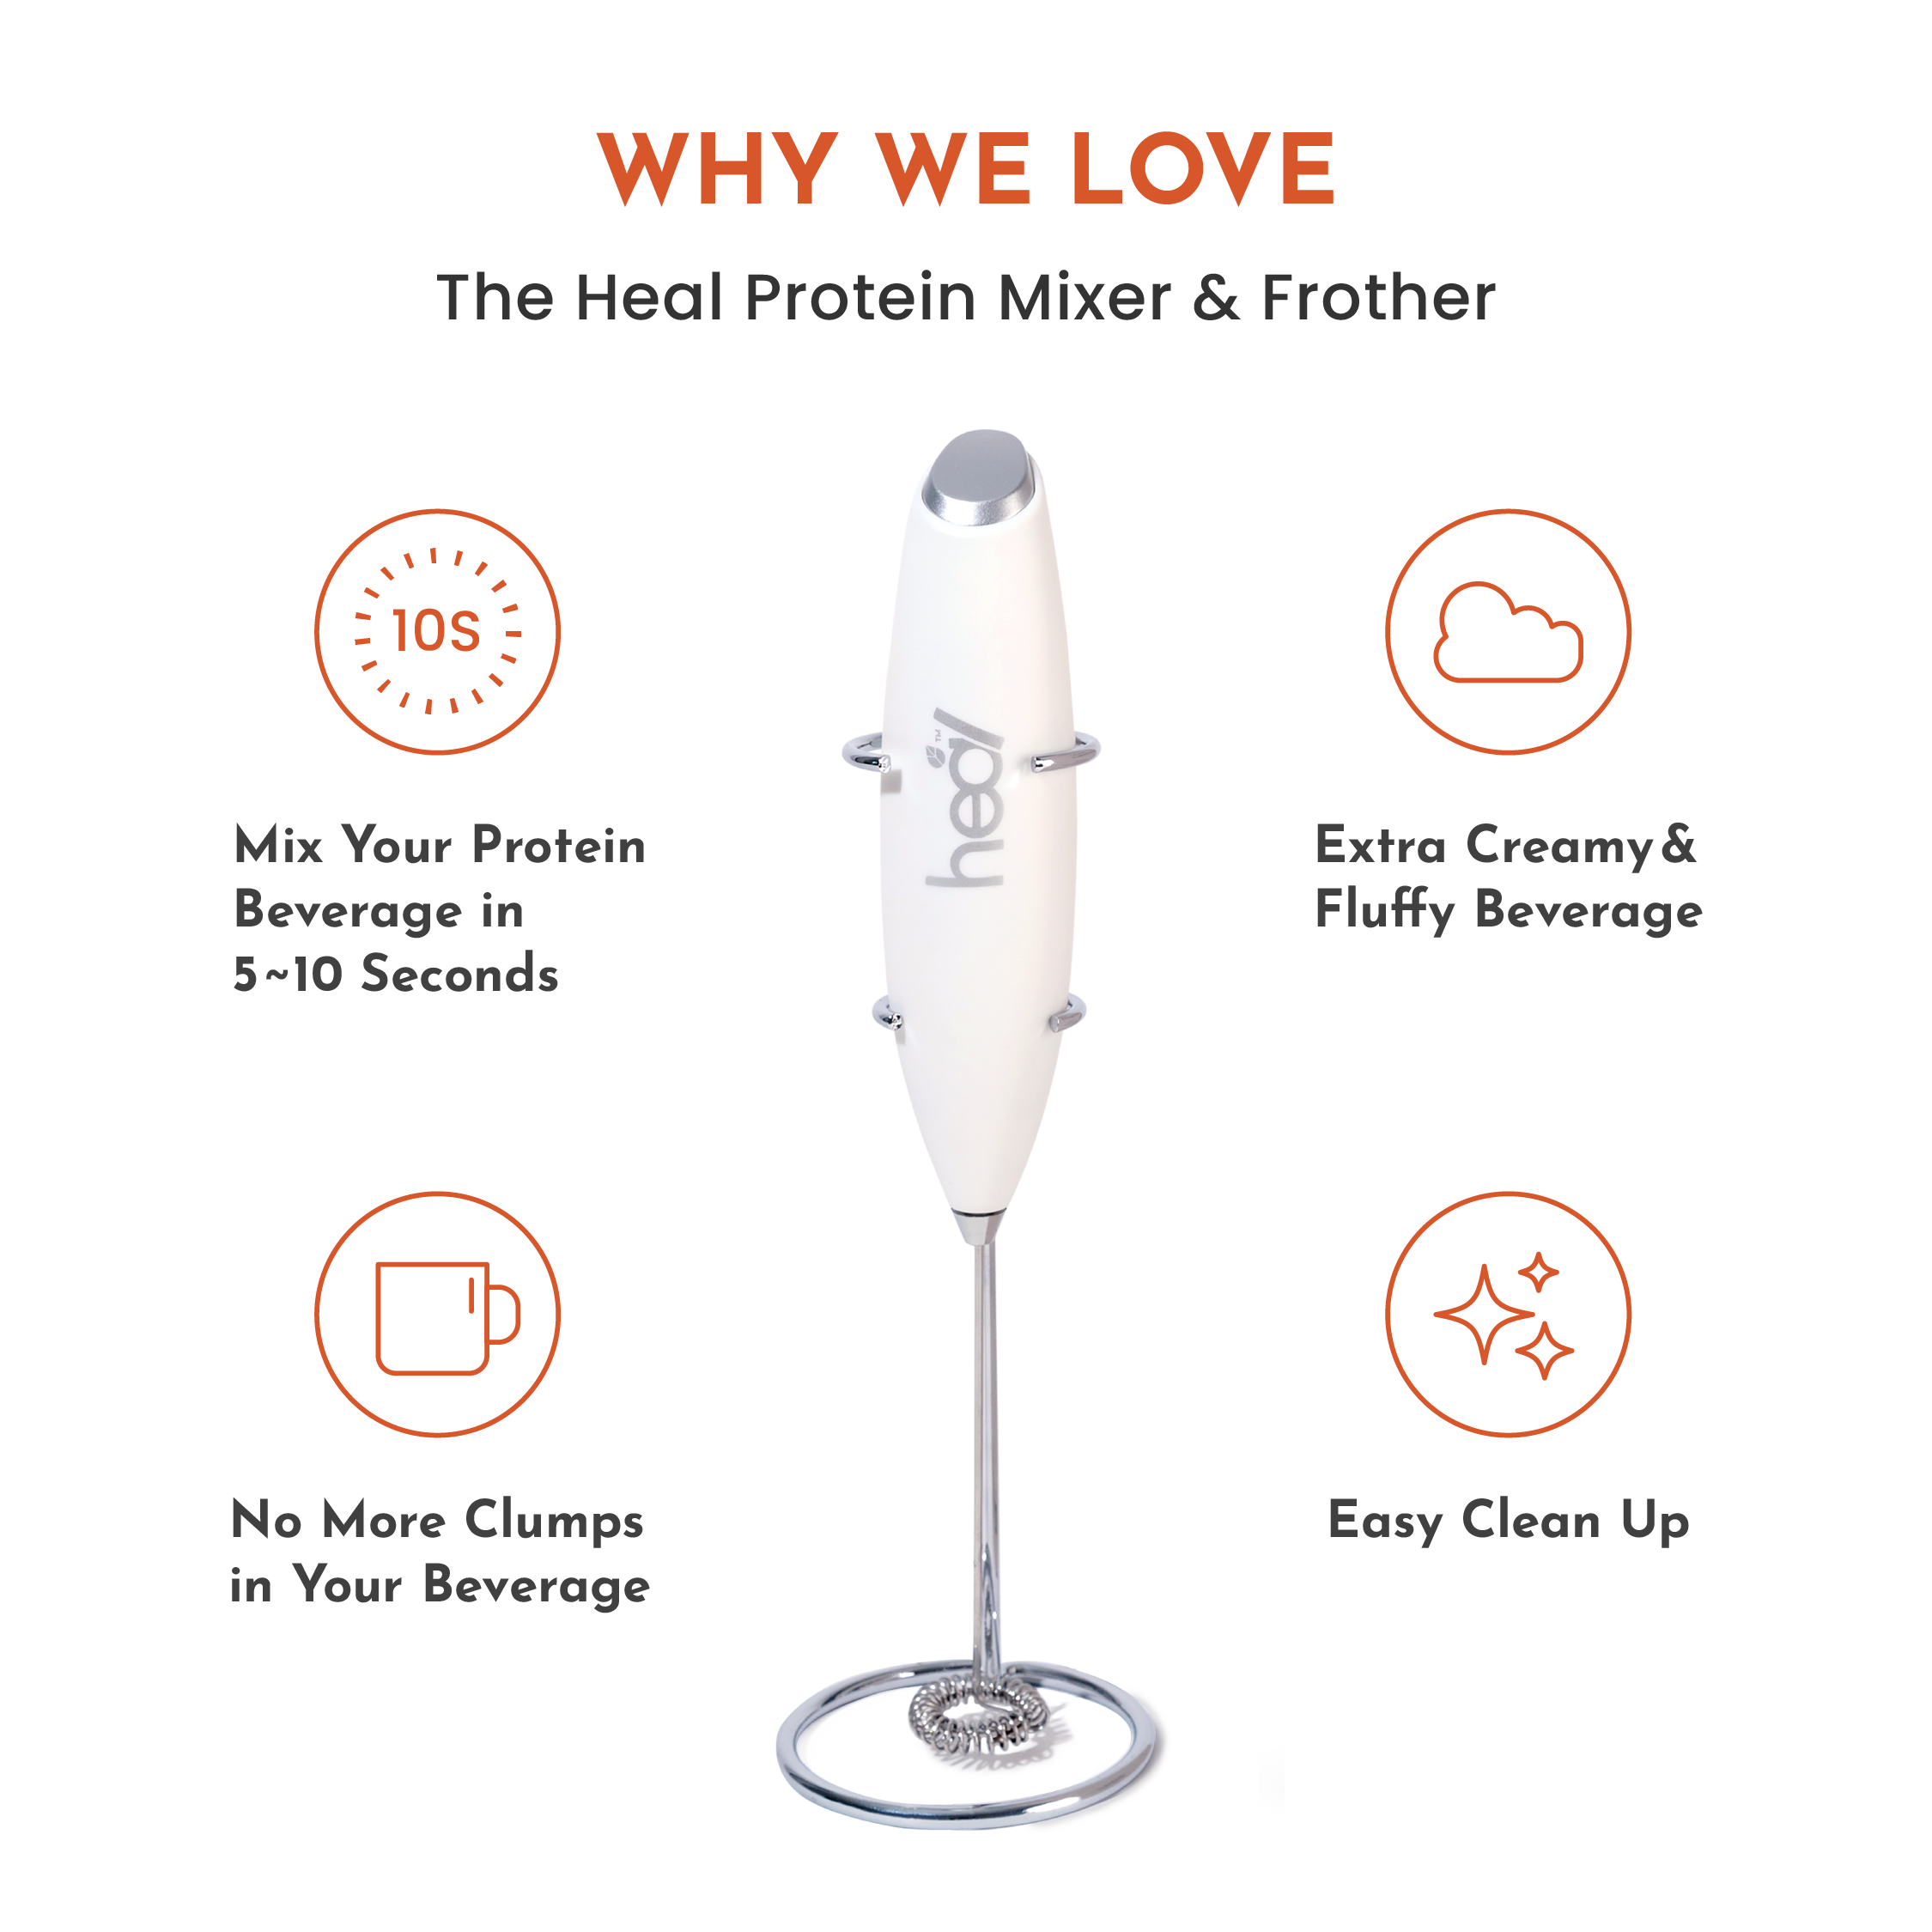 Heal Protein Mixer & Frother